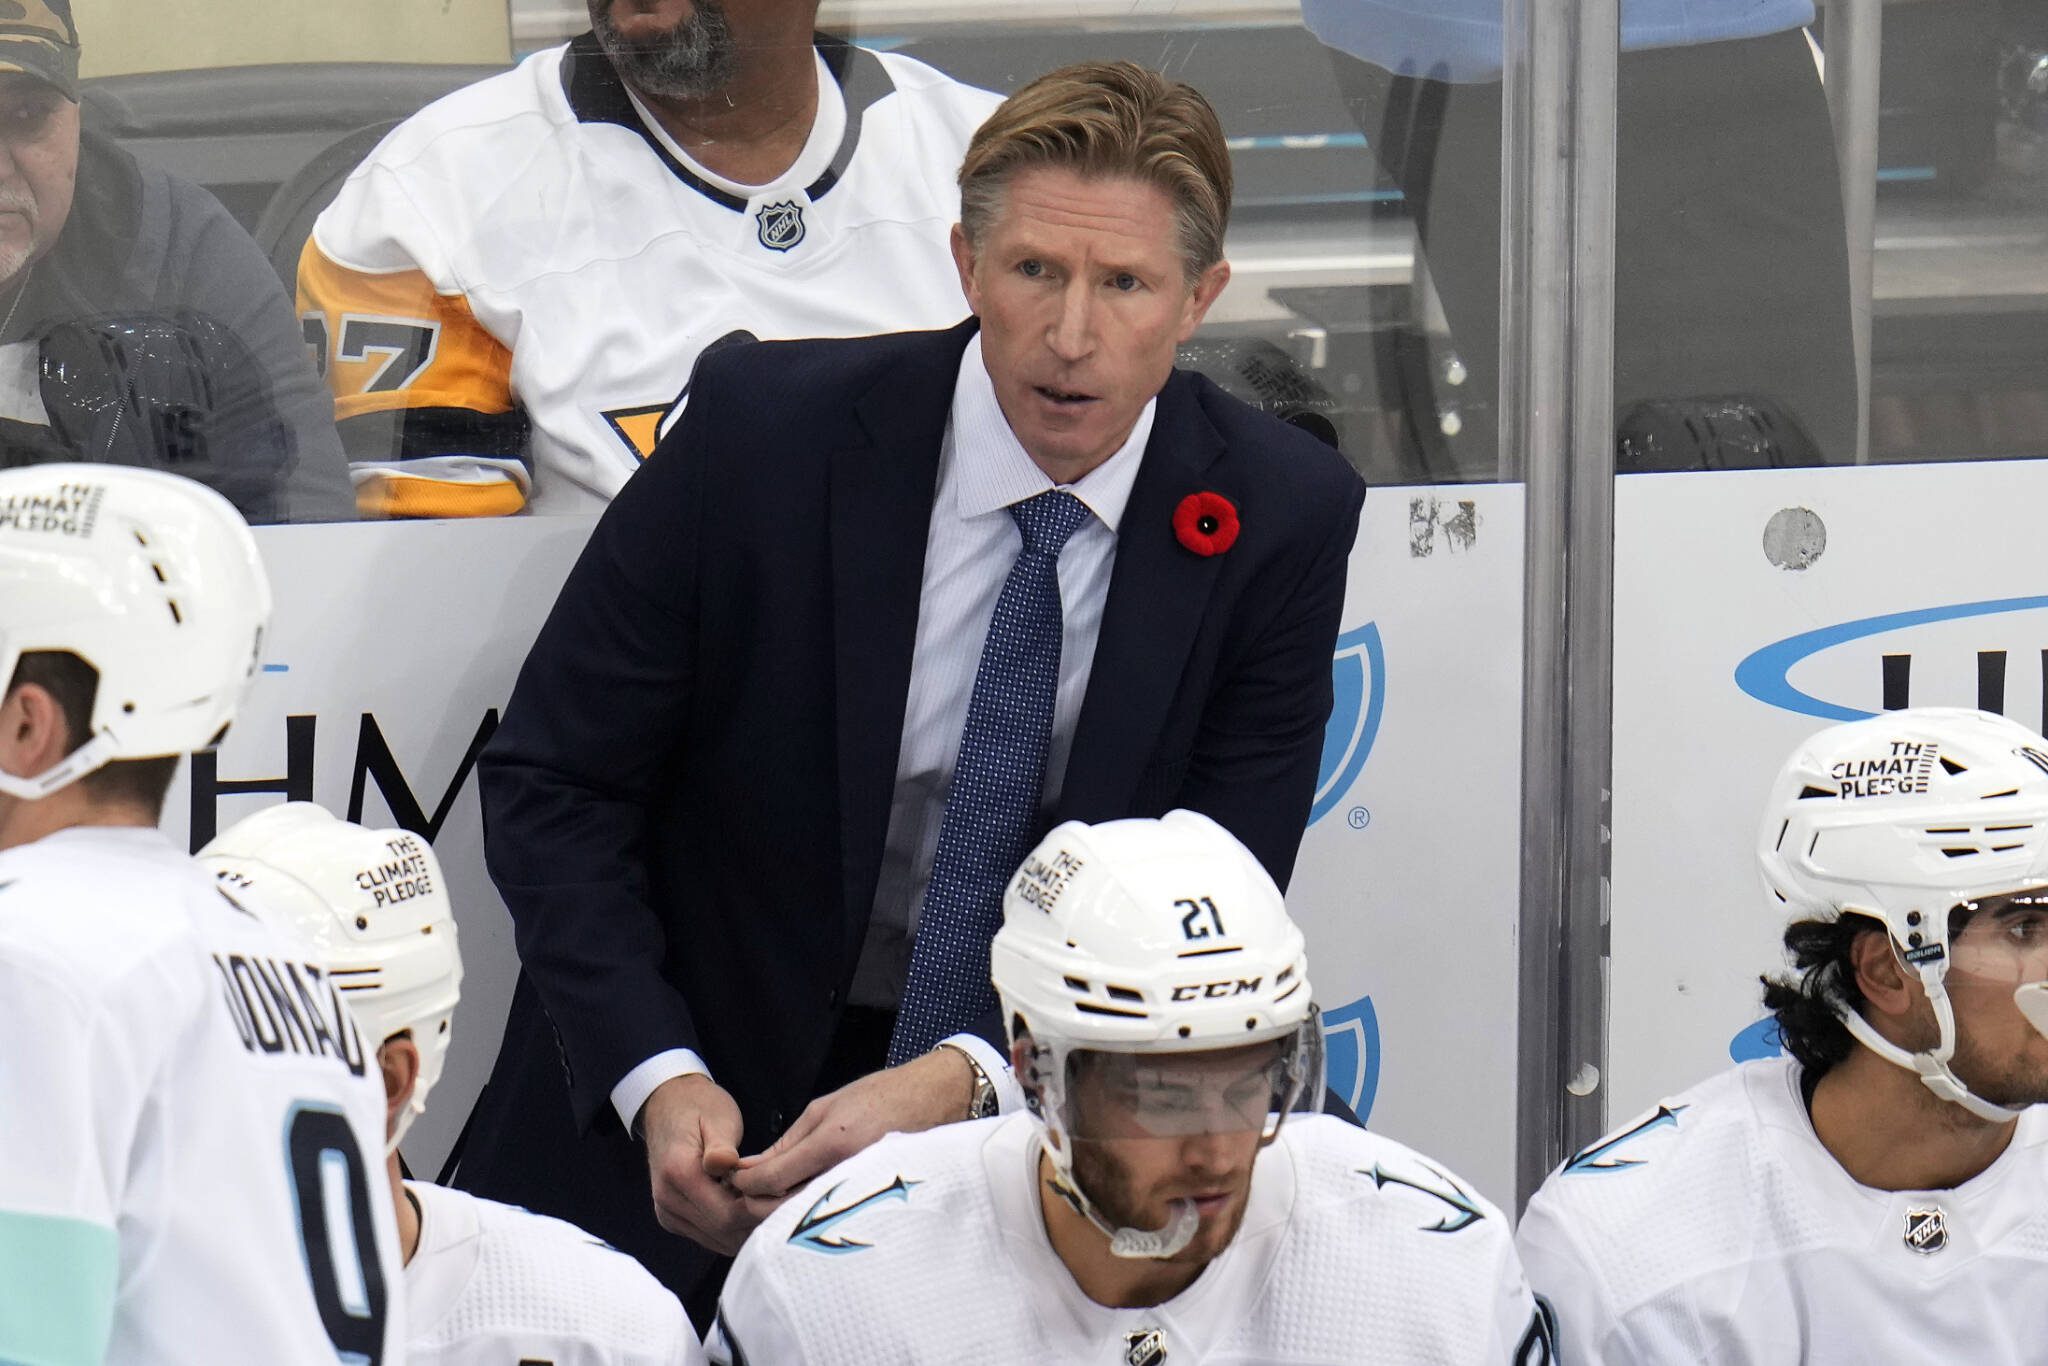 Seattle Kraken head coach Dave Hakstol stands behind his bench during the third period of a game against the Pittsburgh Penguins on Nov. 5, 2022, in Pittsburgh. (AP Photo/Gene J. Puskar)